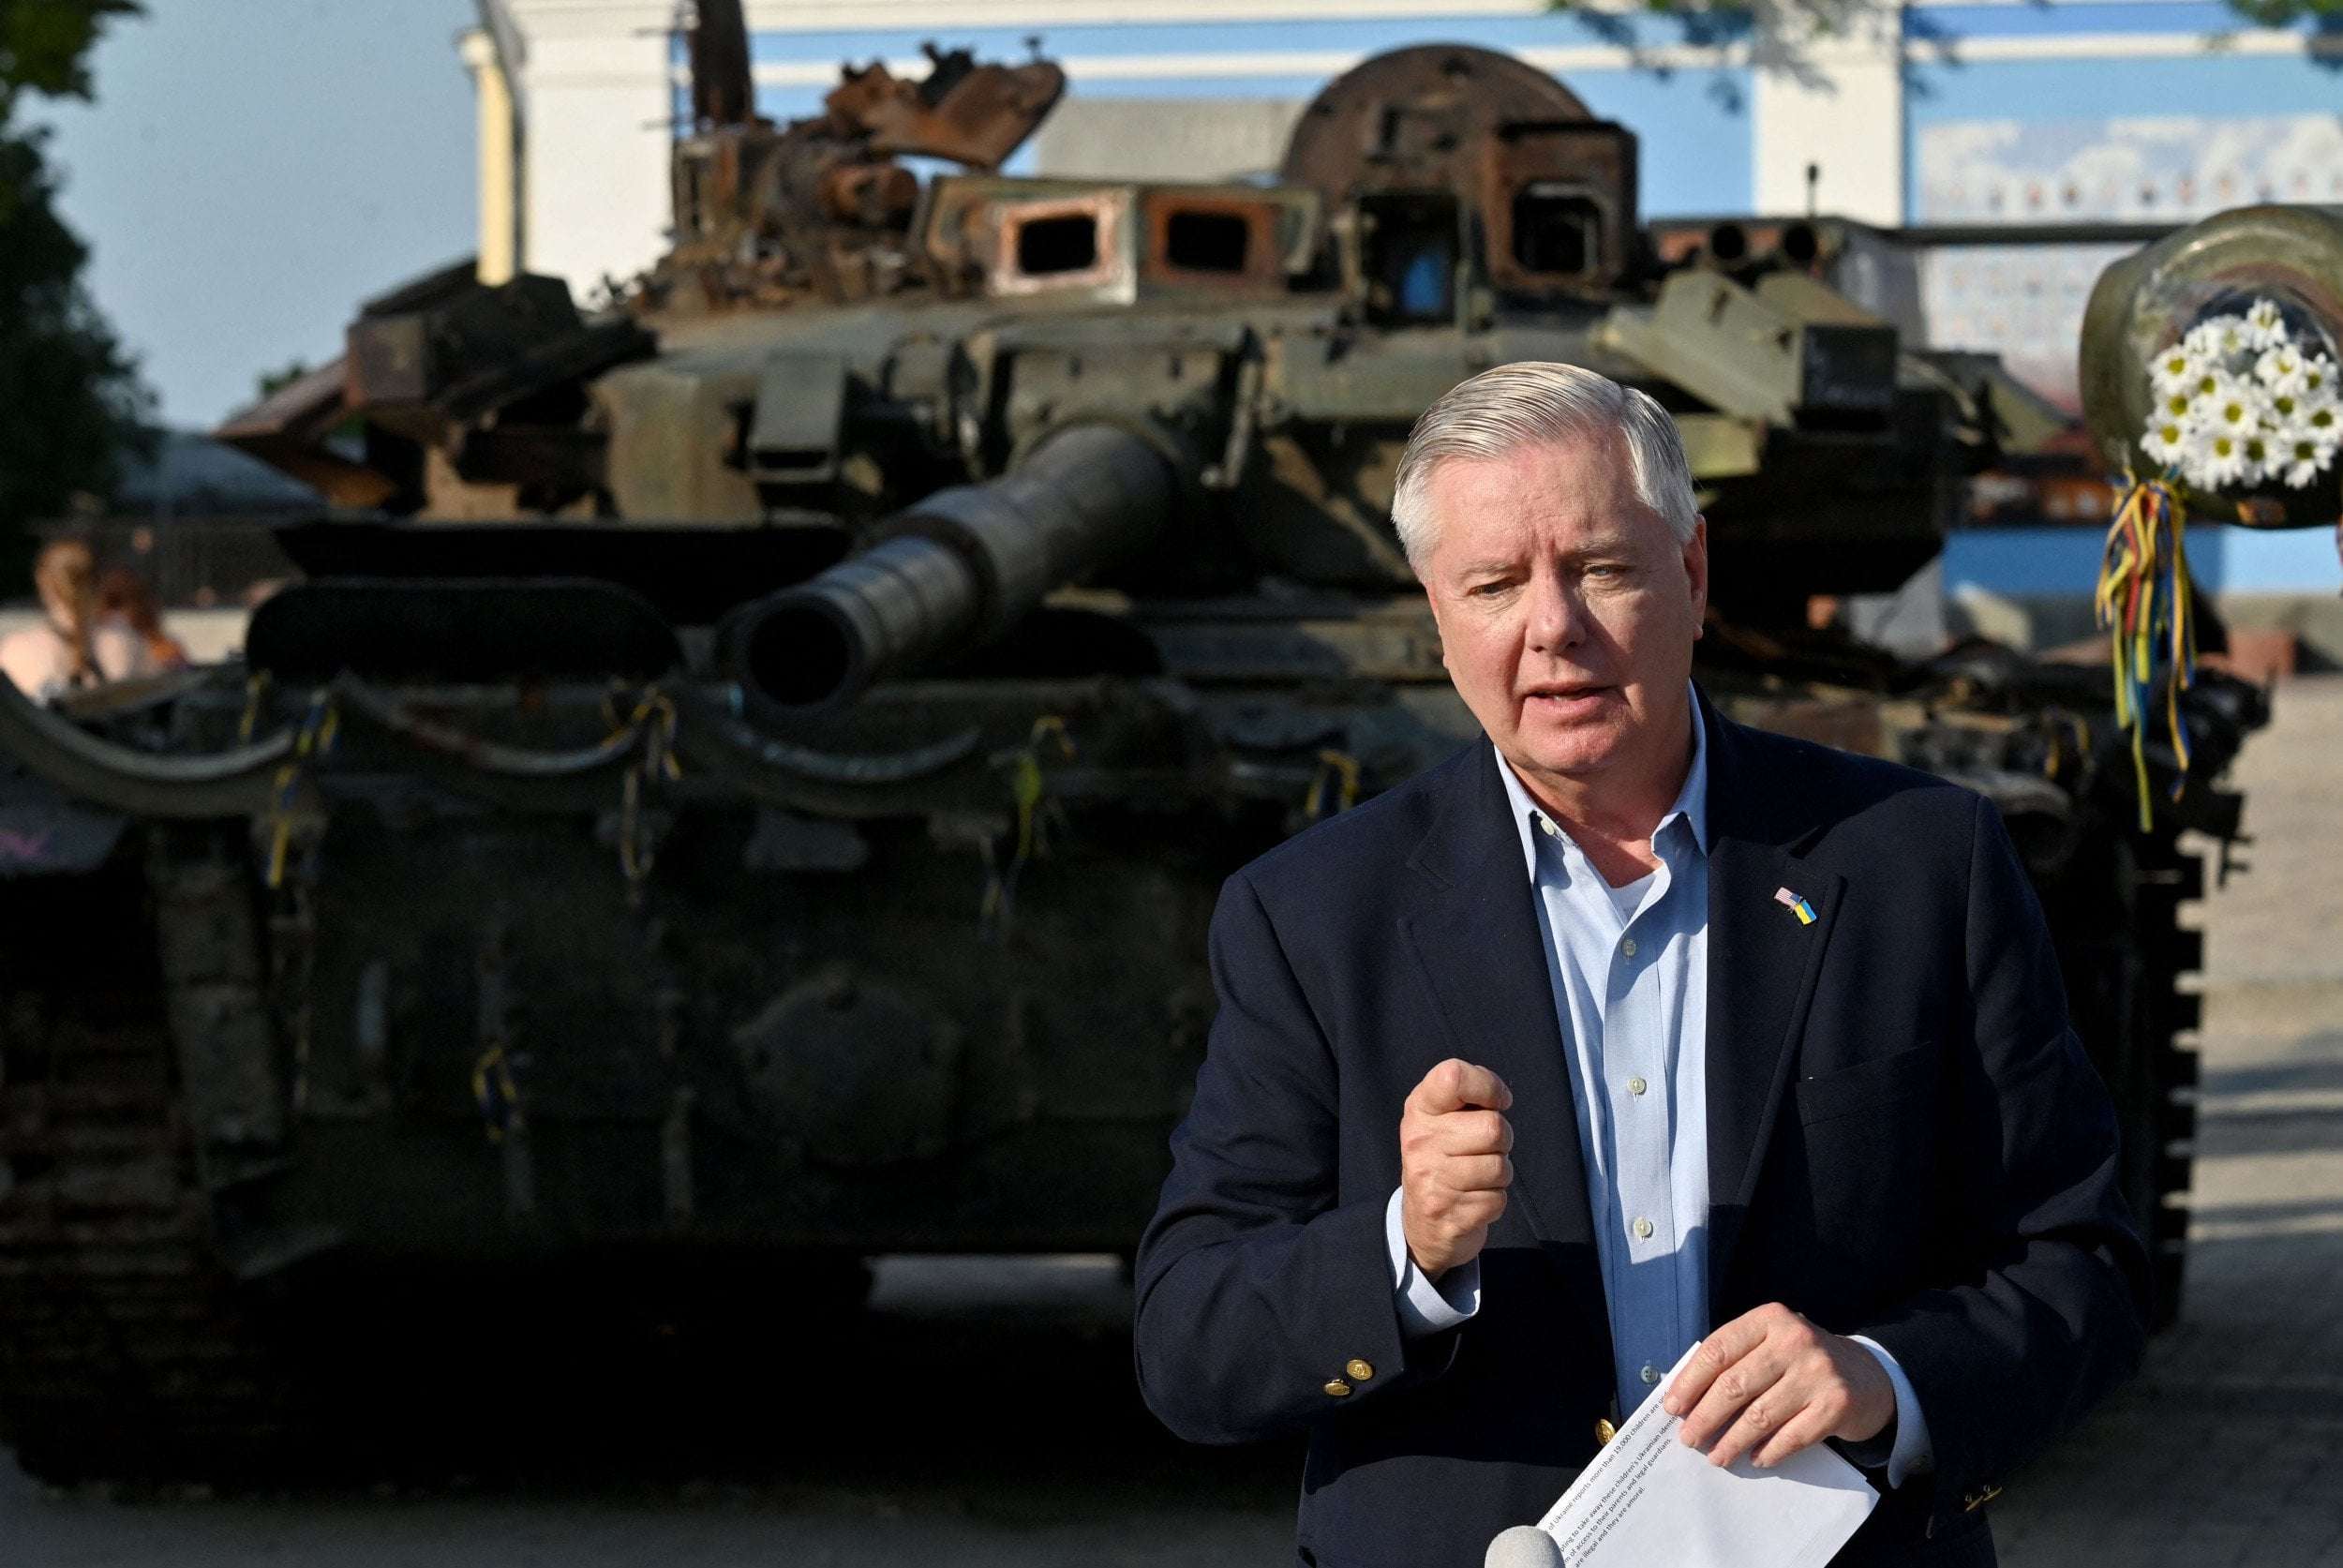 image for Lindsey Graham Appears to Say Russians Dying 'Best Money We've Ever Spent'